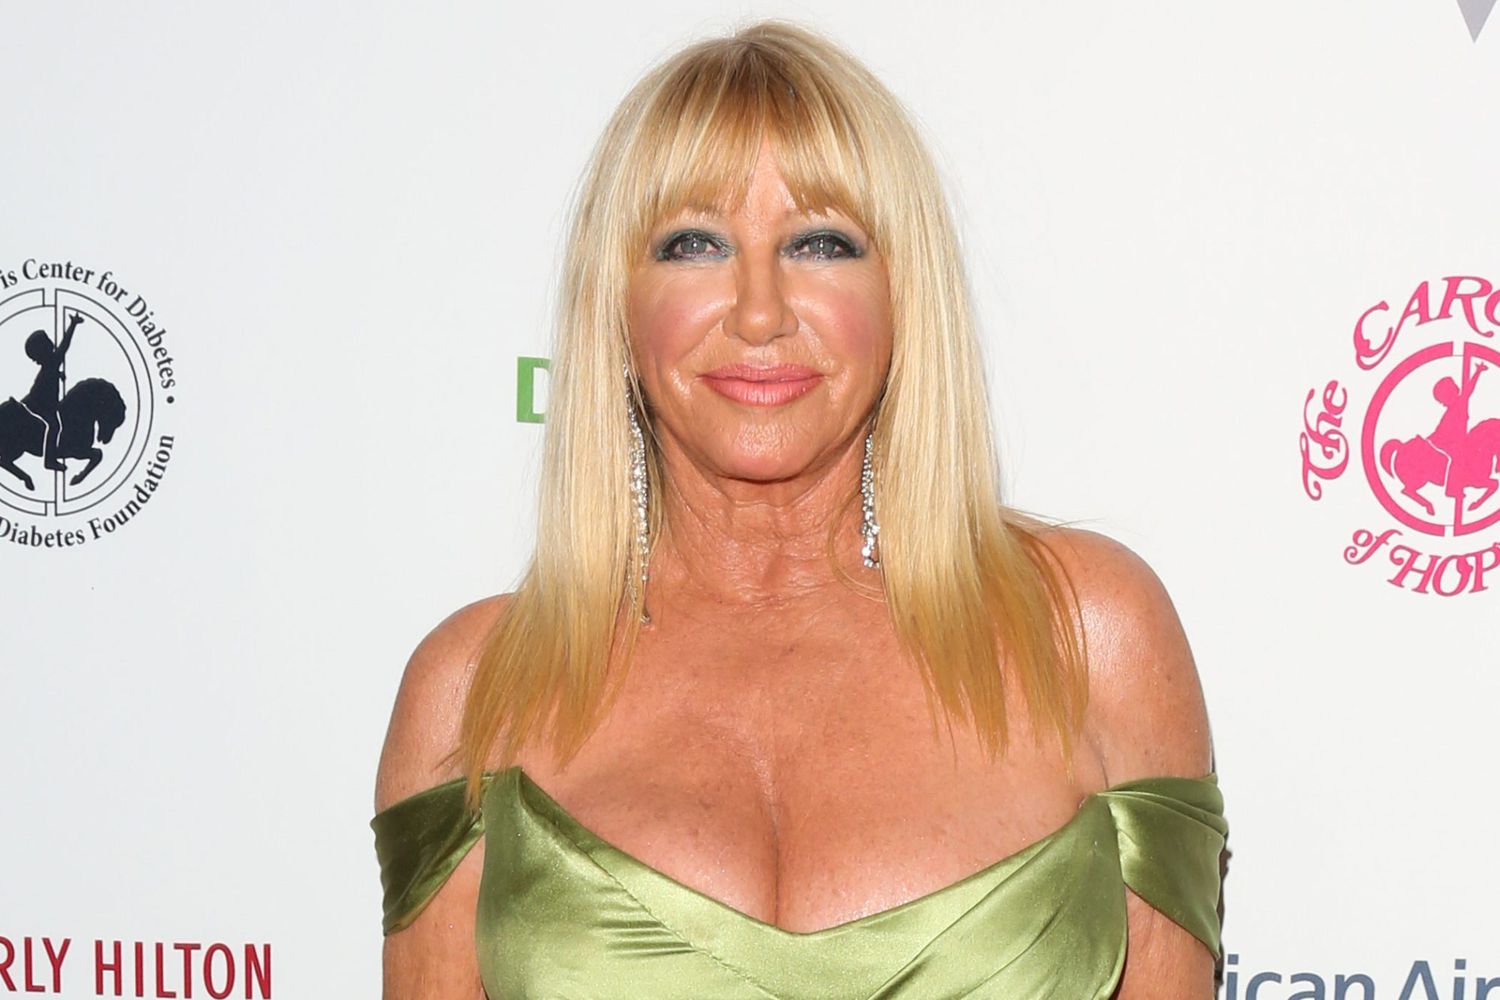 david hinkebein recommends suzanne somers tits pic